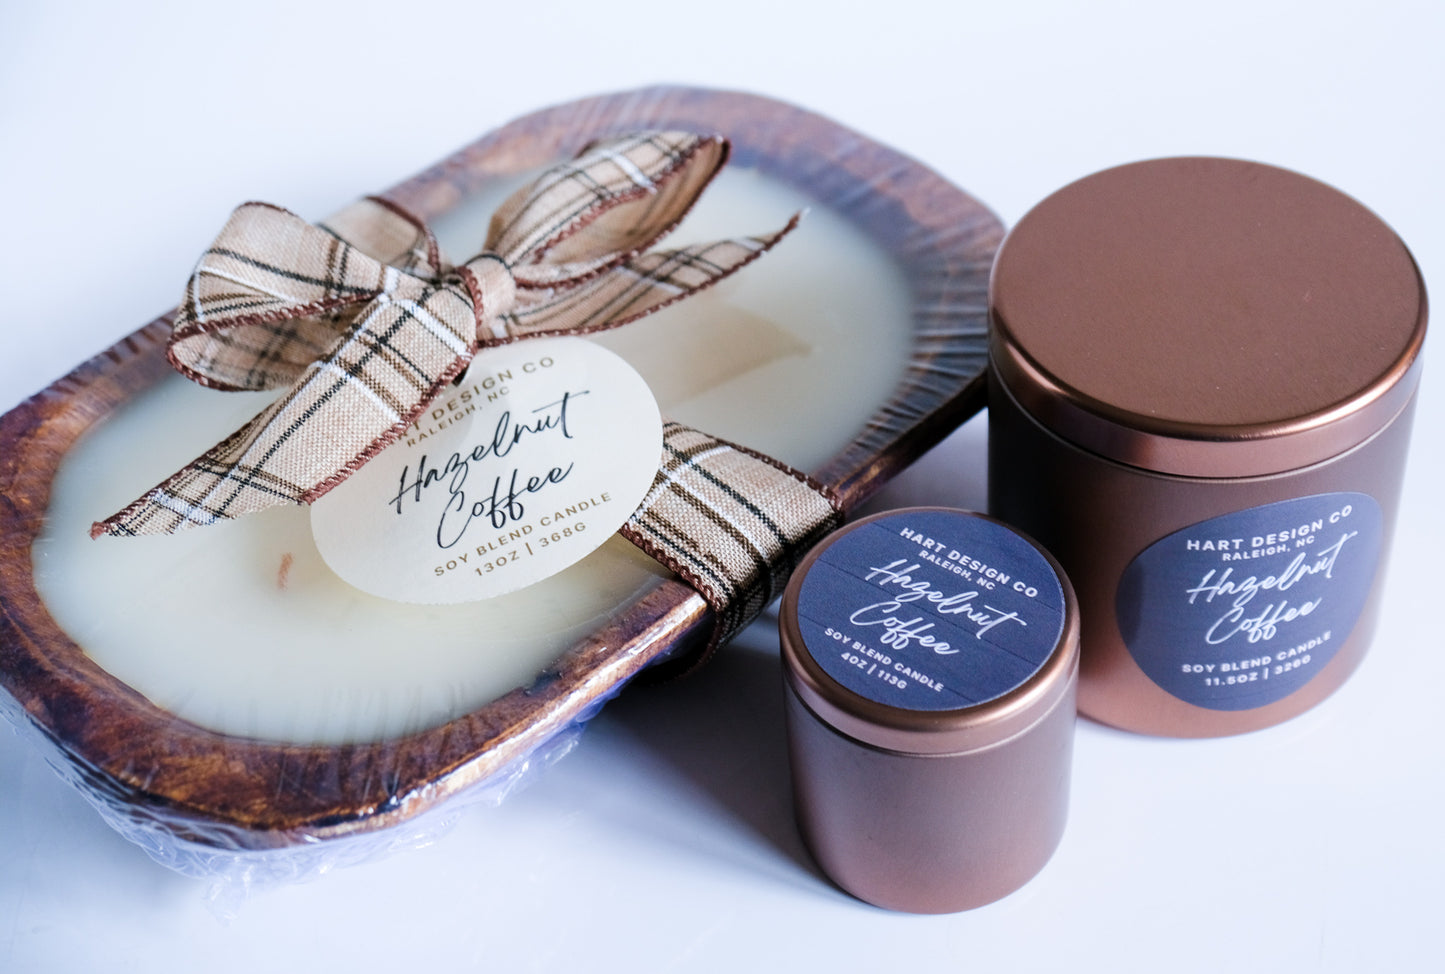 Hazelnut Coffee | The Bake Shop Collection